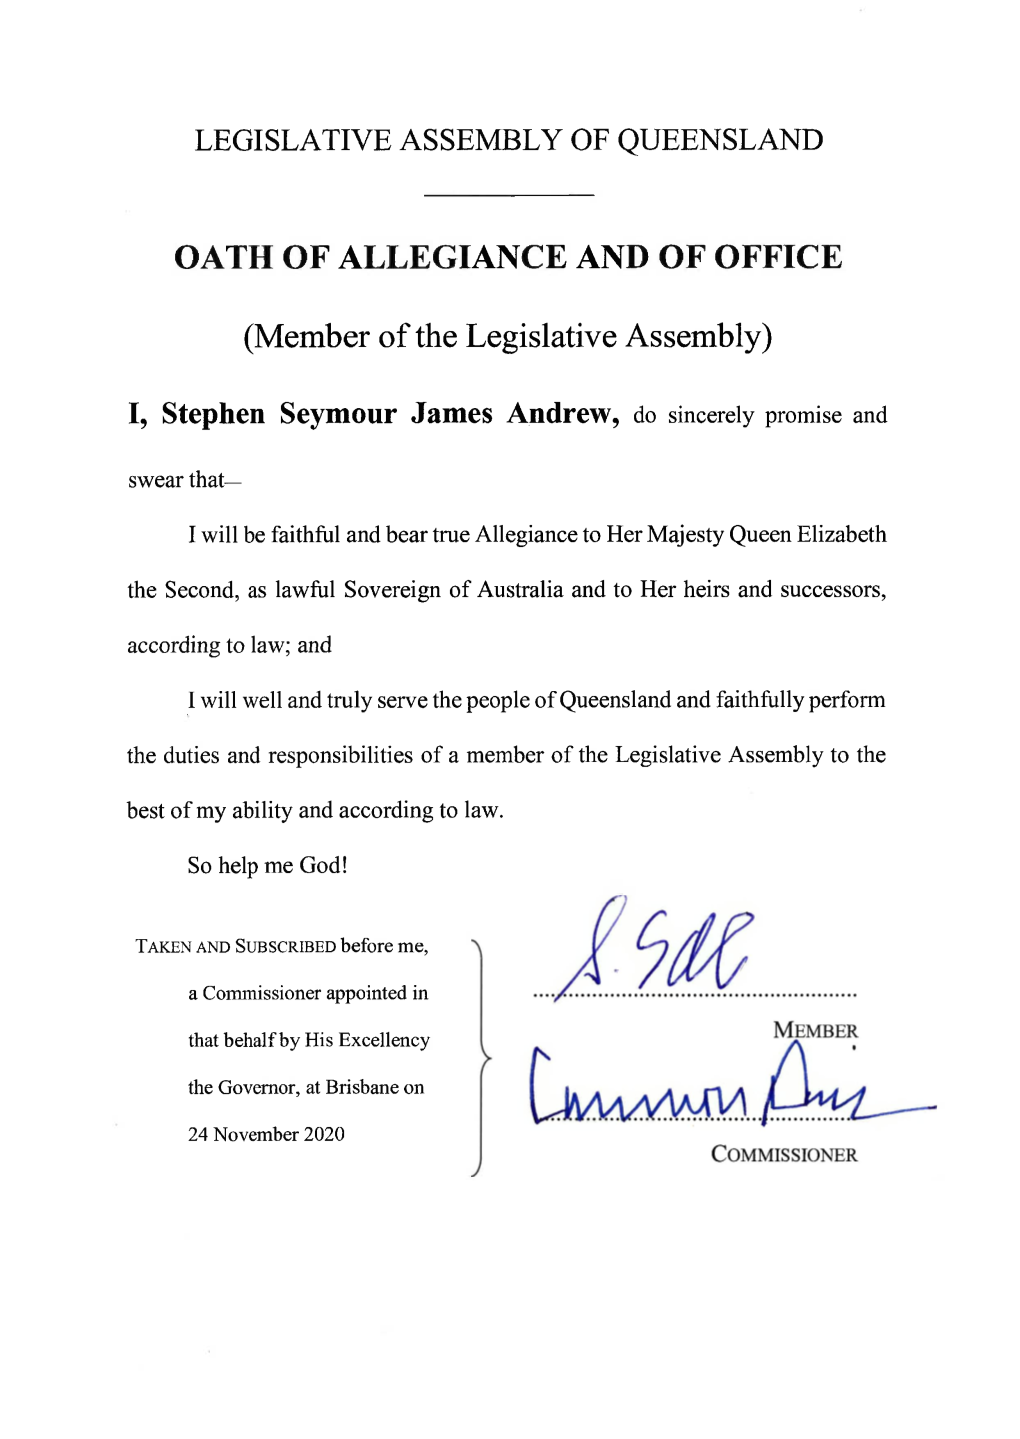 Oath of Allegiance and of Office